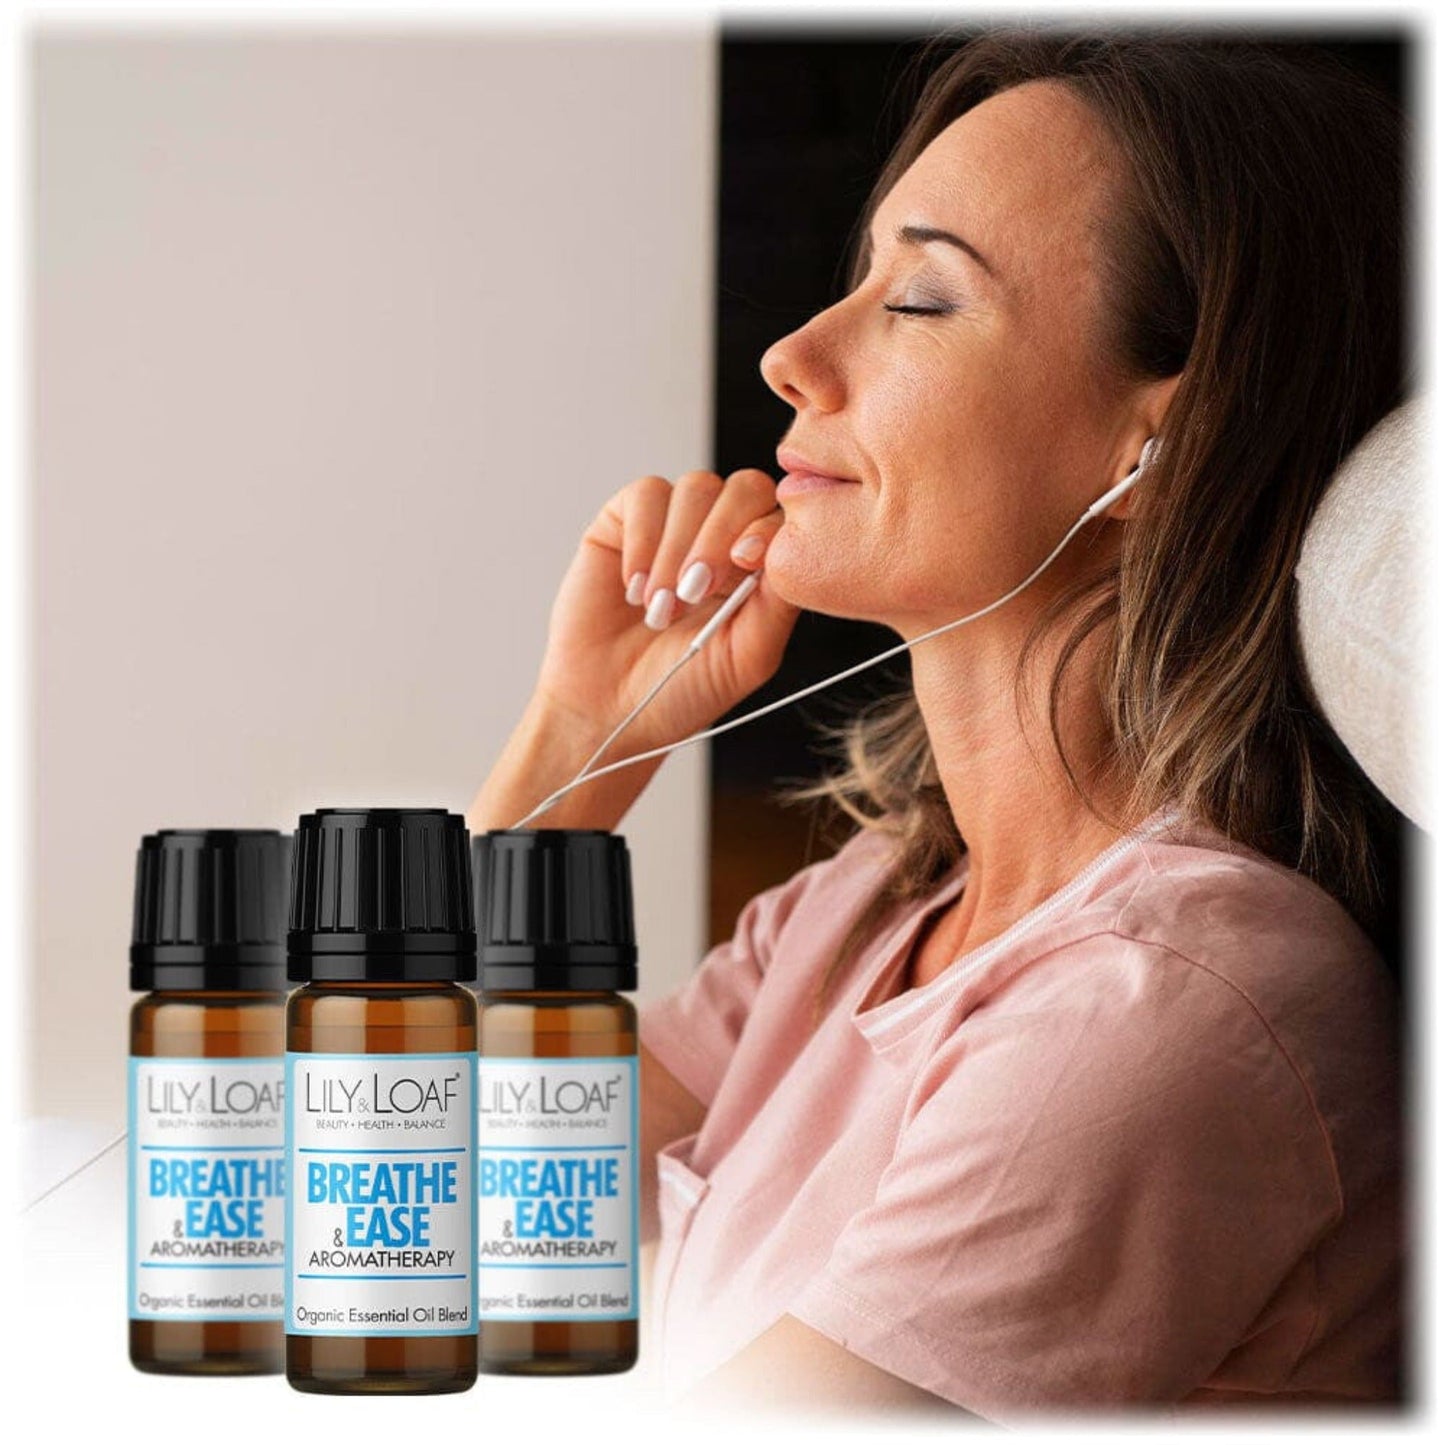 Lily & Loaf Breathe & Ease Aromatherapy Blend 10ml Essential Oil promotes relaxation